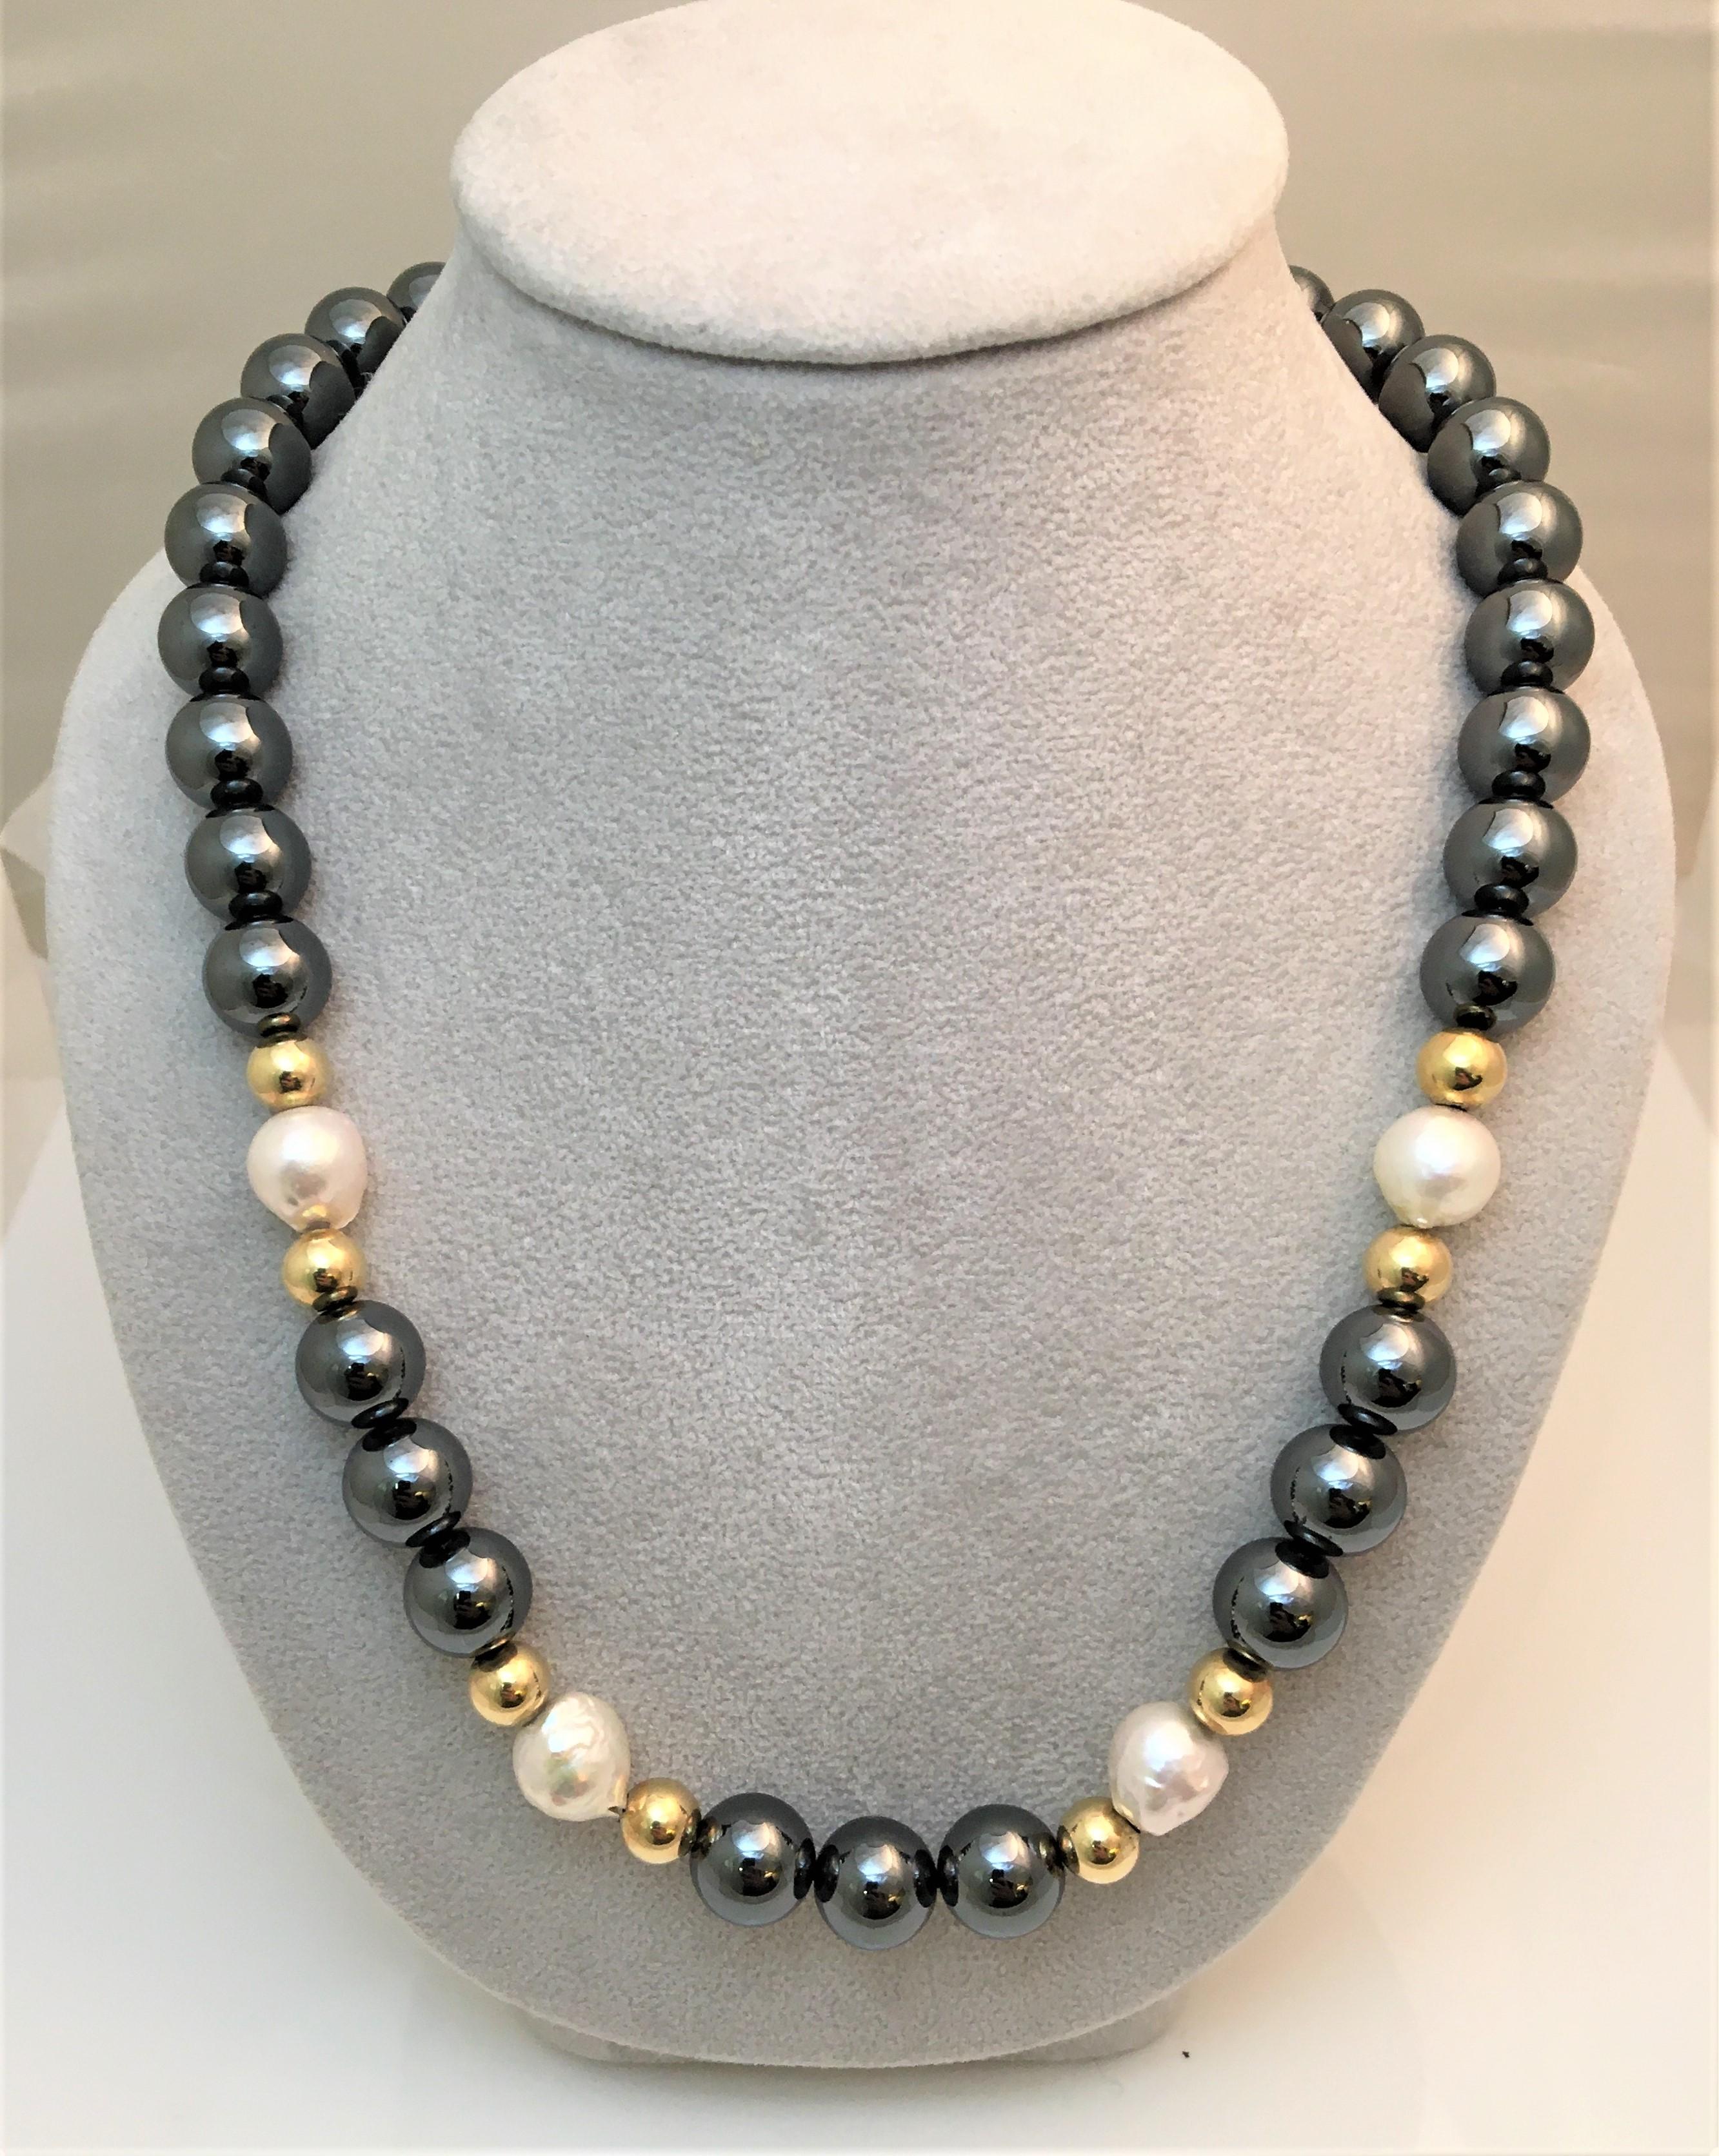 This is a one-of-a-kind necklace!   
Thirty three hematite beads, approximately 10mm each
Eight 14 karat yellow beads, approximately 7mm each
Four white pearls varying in size
14 karat yellow gold strong magnetic closure
Approximately 18 inches